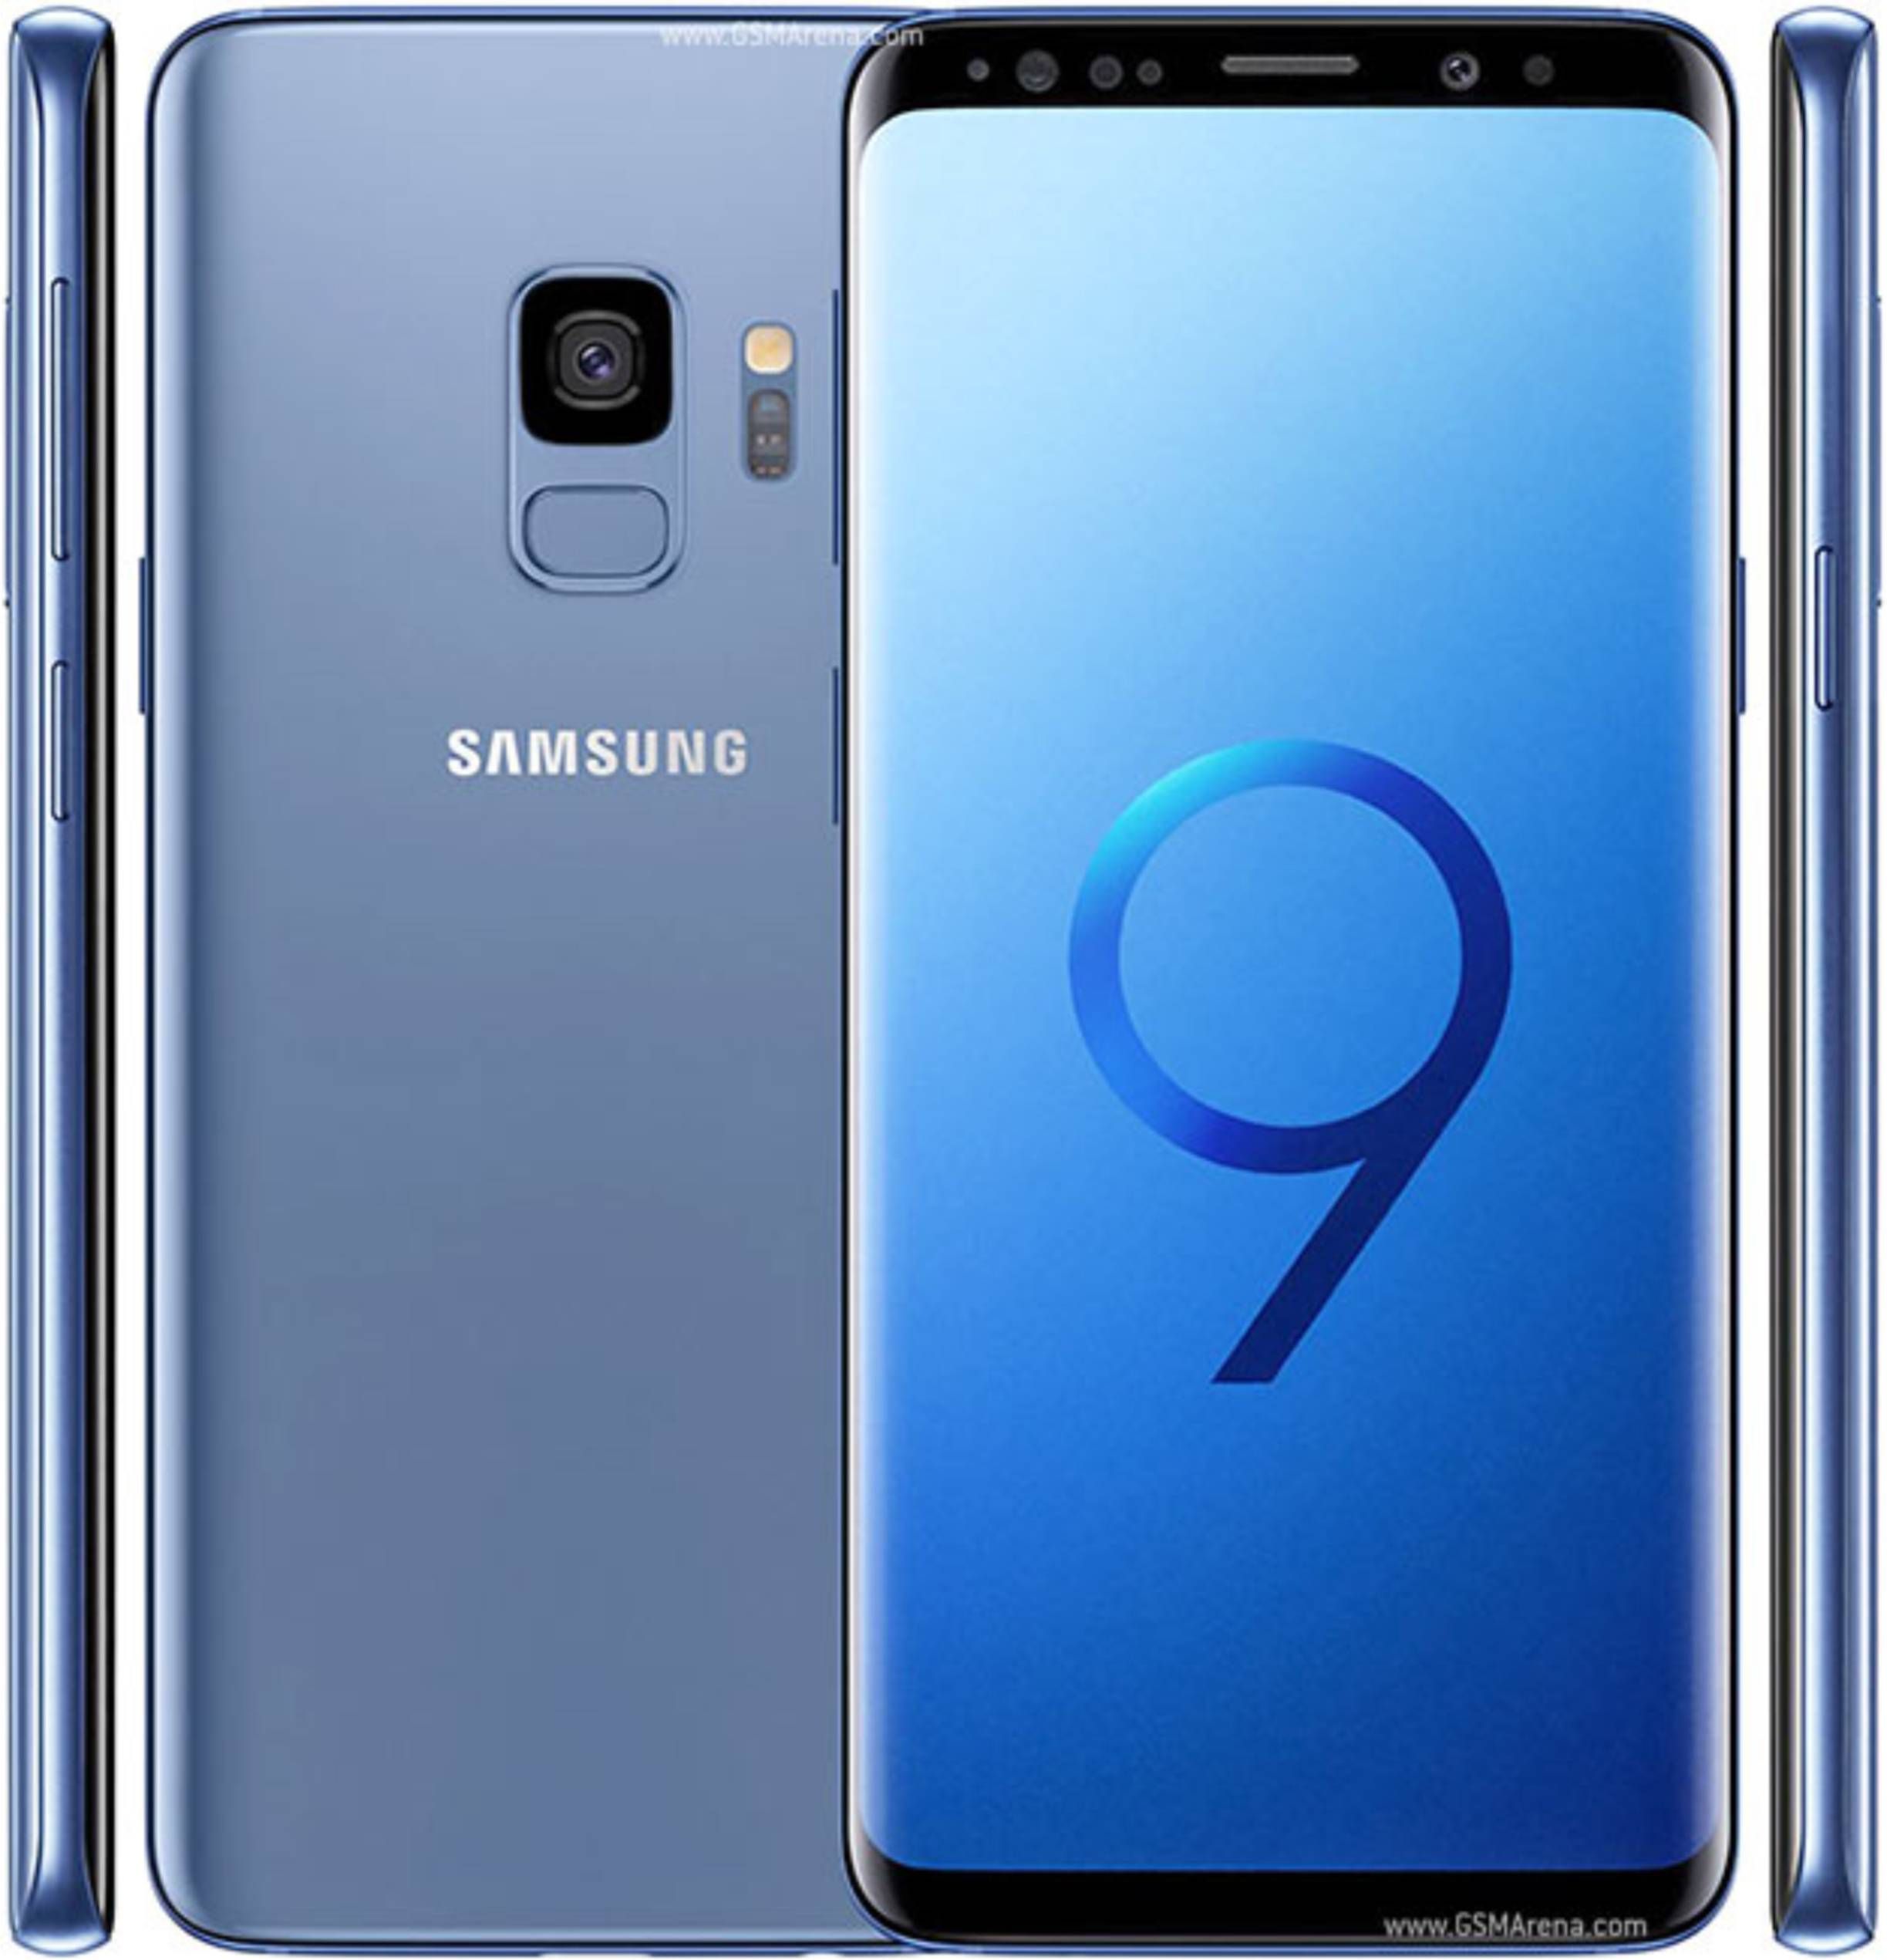 What is Samsung Galaxy S9 Screen Replacement Cost in Nairobi?